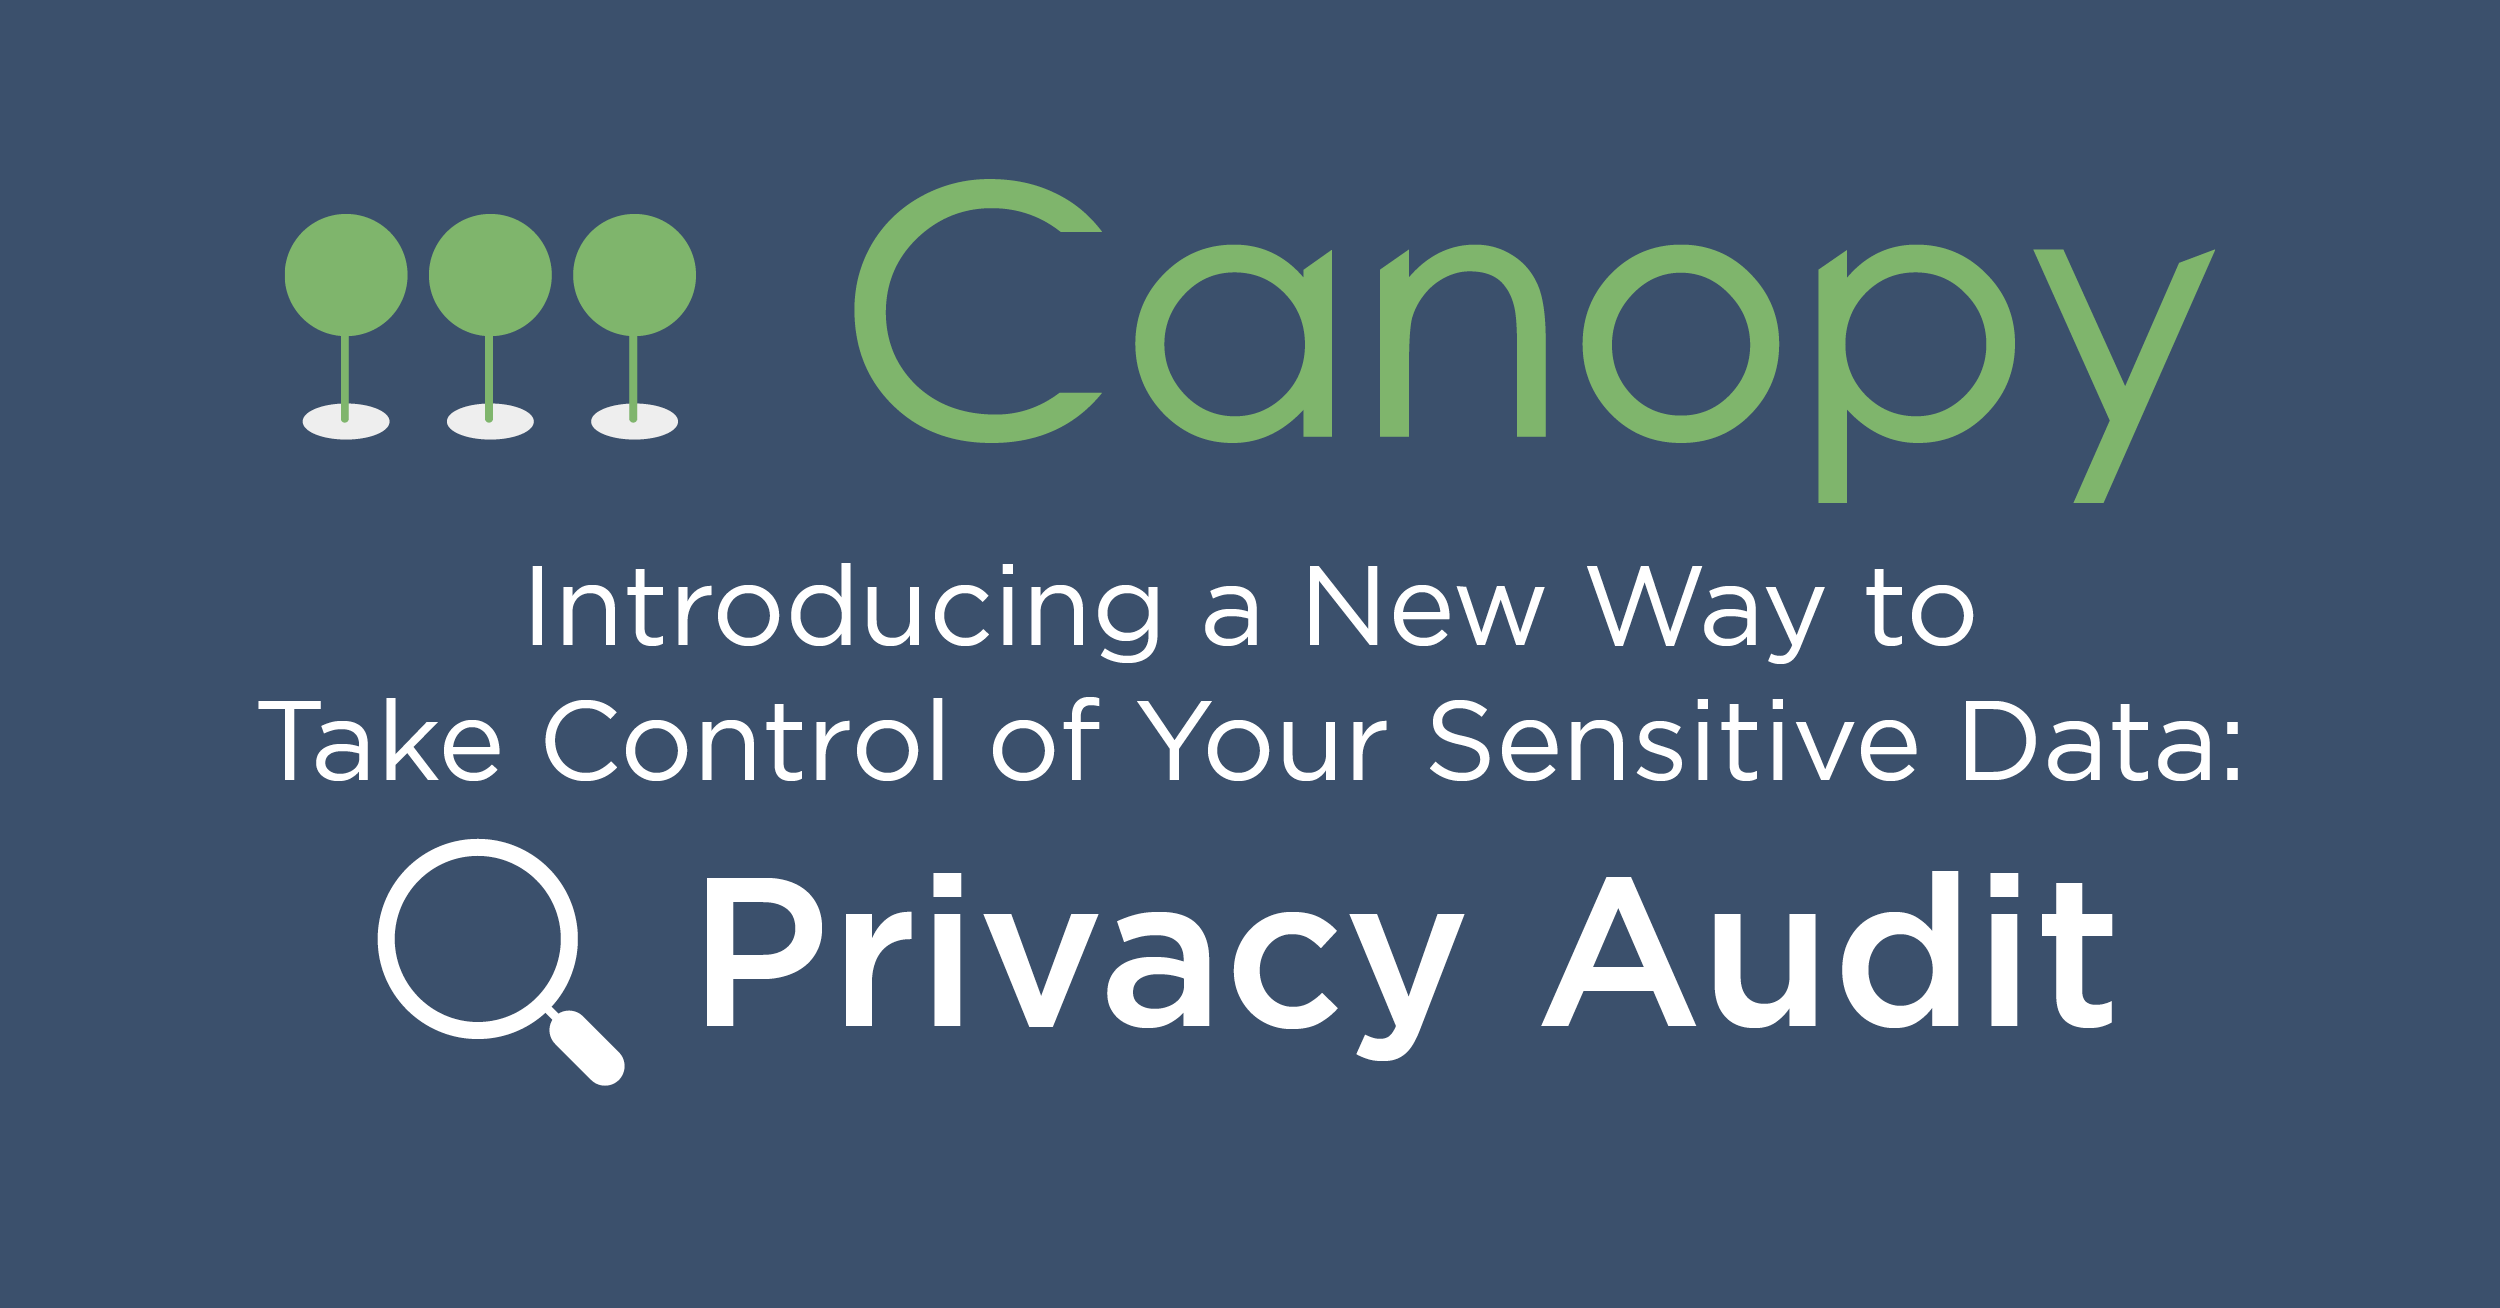 Graphic with Canopy logo and text: Introducing a New Way to Take Control of Your Sensitive Data, Privacy Audit